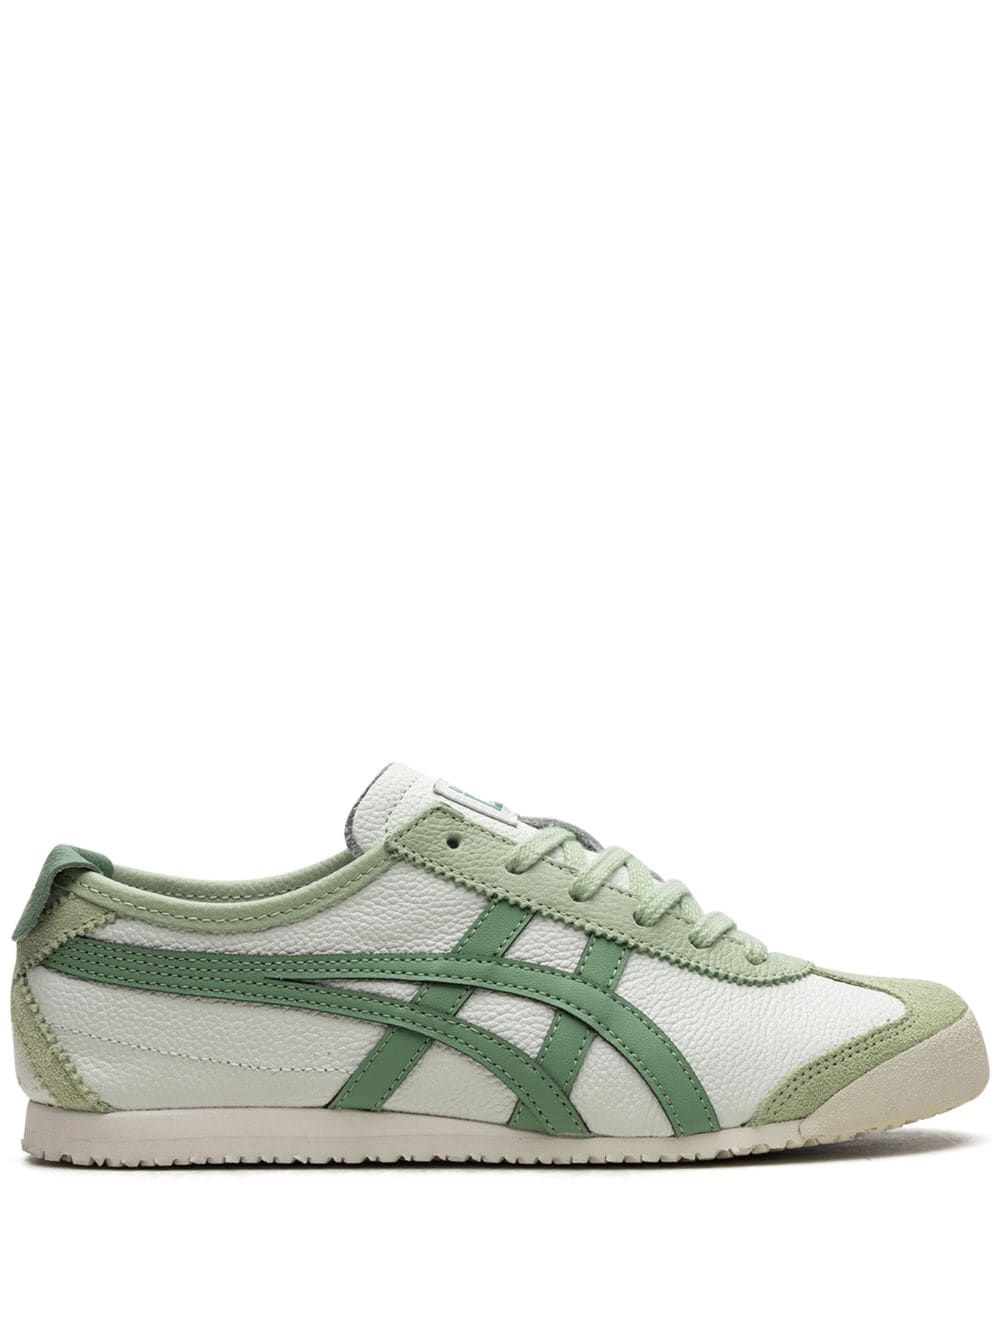 Mexico 66 "Airy Green" sneakers | Farfetch Global